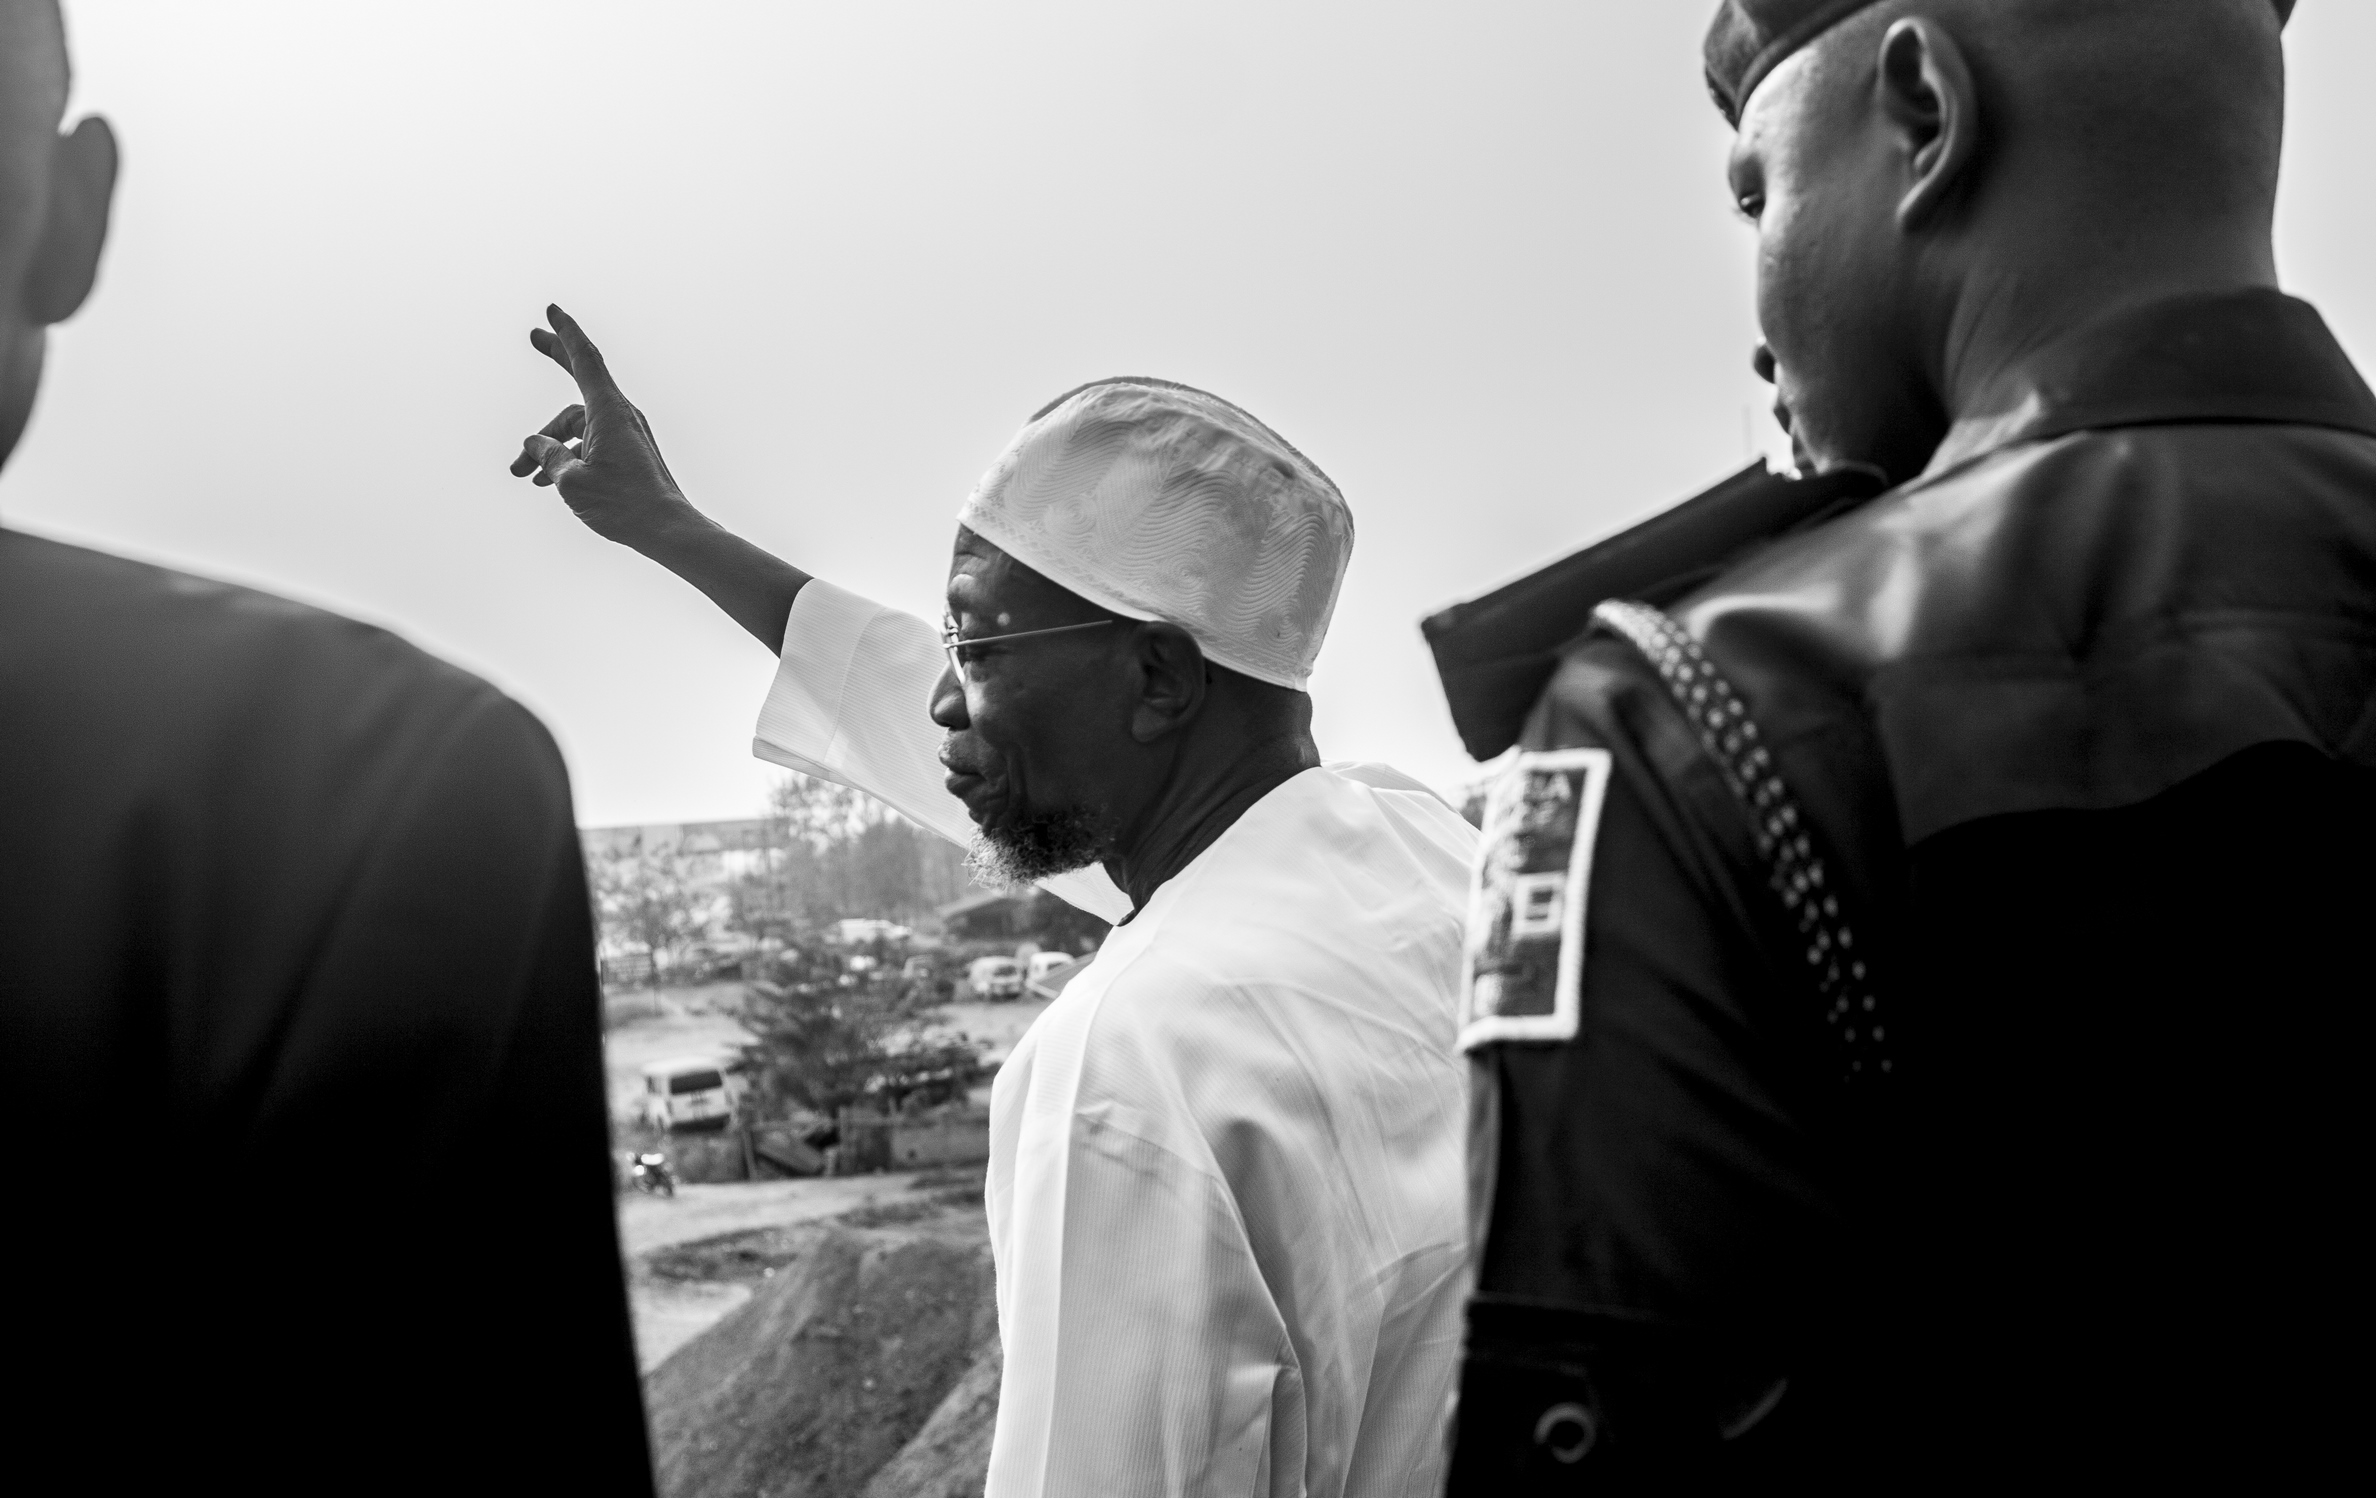 PHOTONEWS: Aregbesola Inspects Ongoing Construction Work At The Bisi Akande Trumpet Bridge In Gbongan